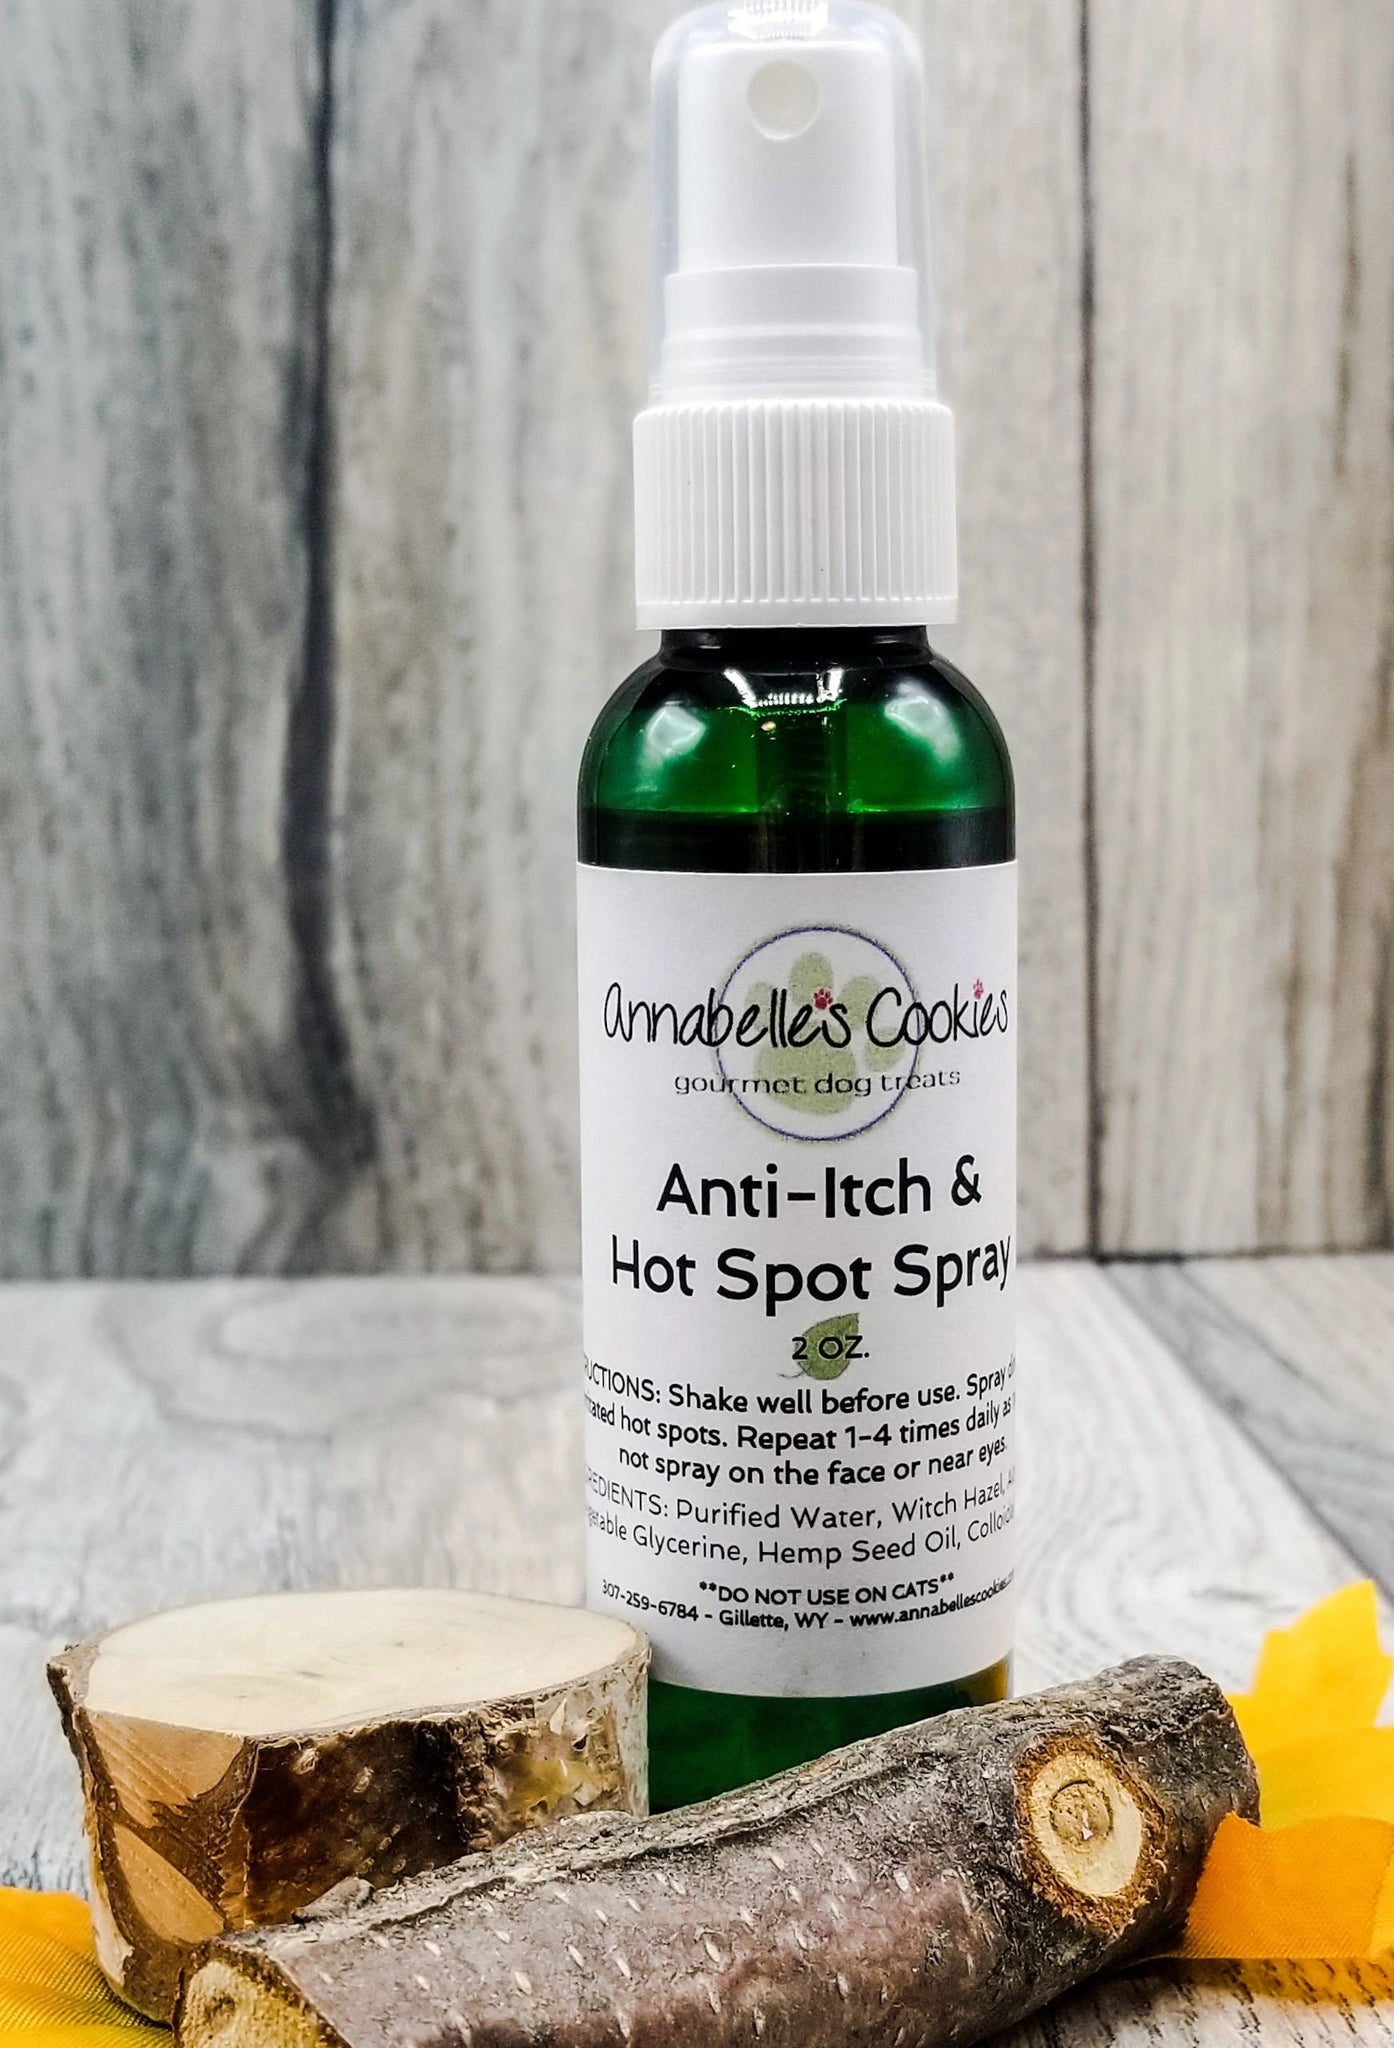 Anti-Itch & Hot Spot Spray for Dogs 100% Natural Relief for Itchy Spots Homemade in Small Batches